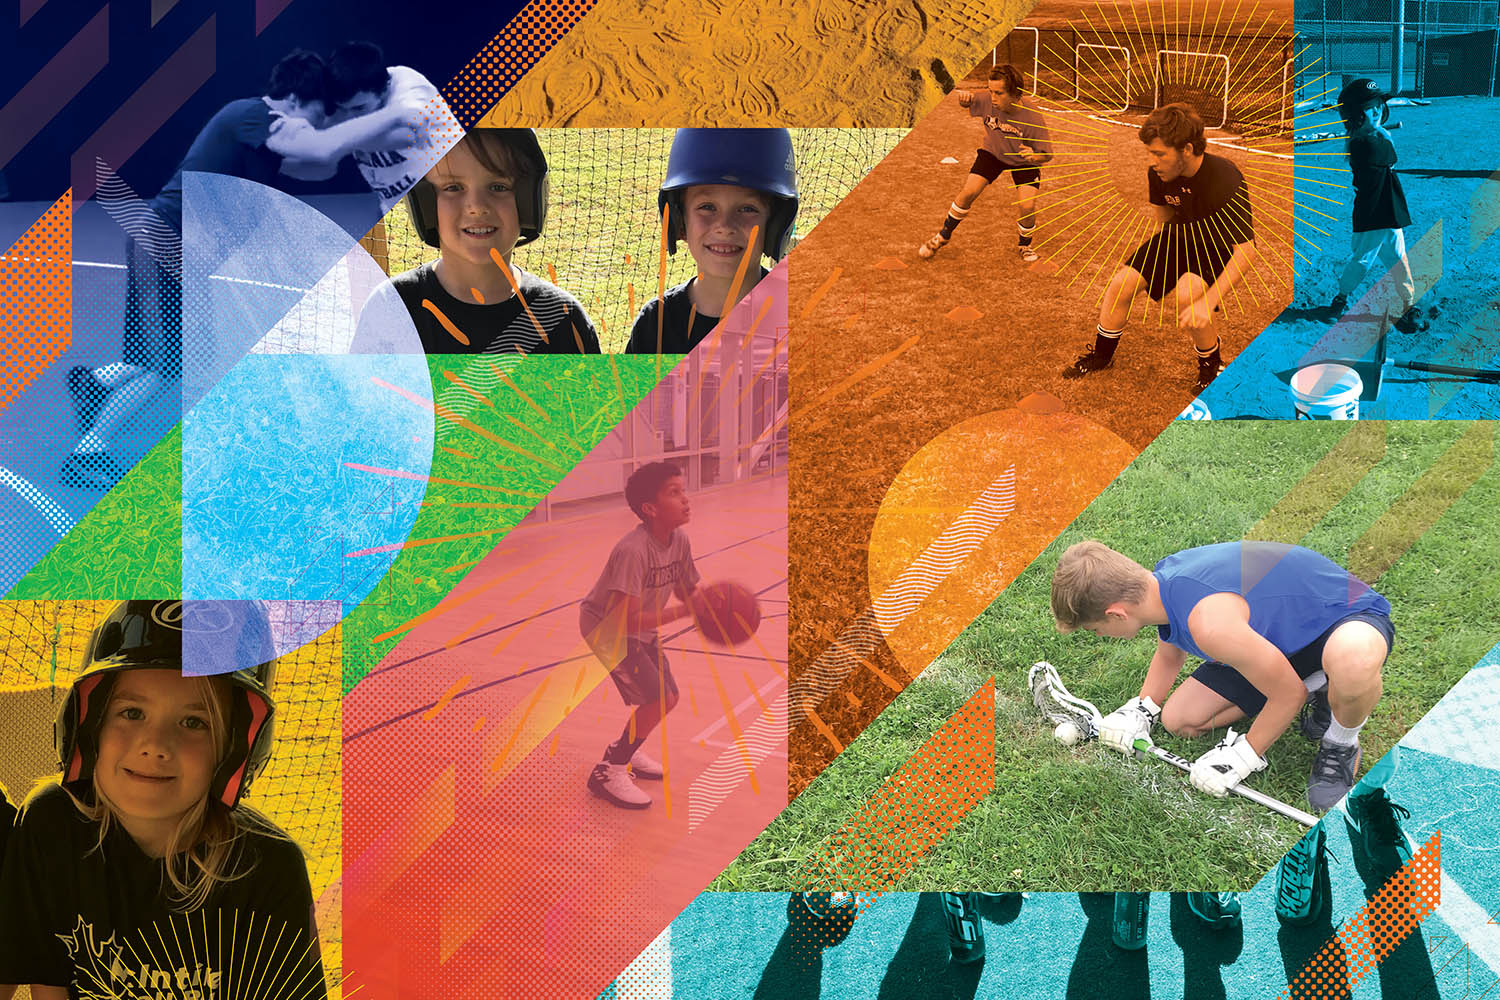 Collage of children playing sports